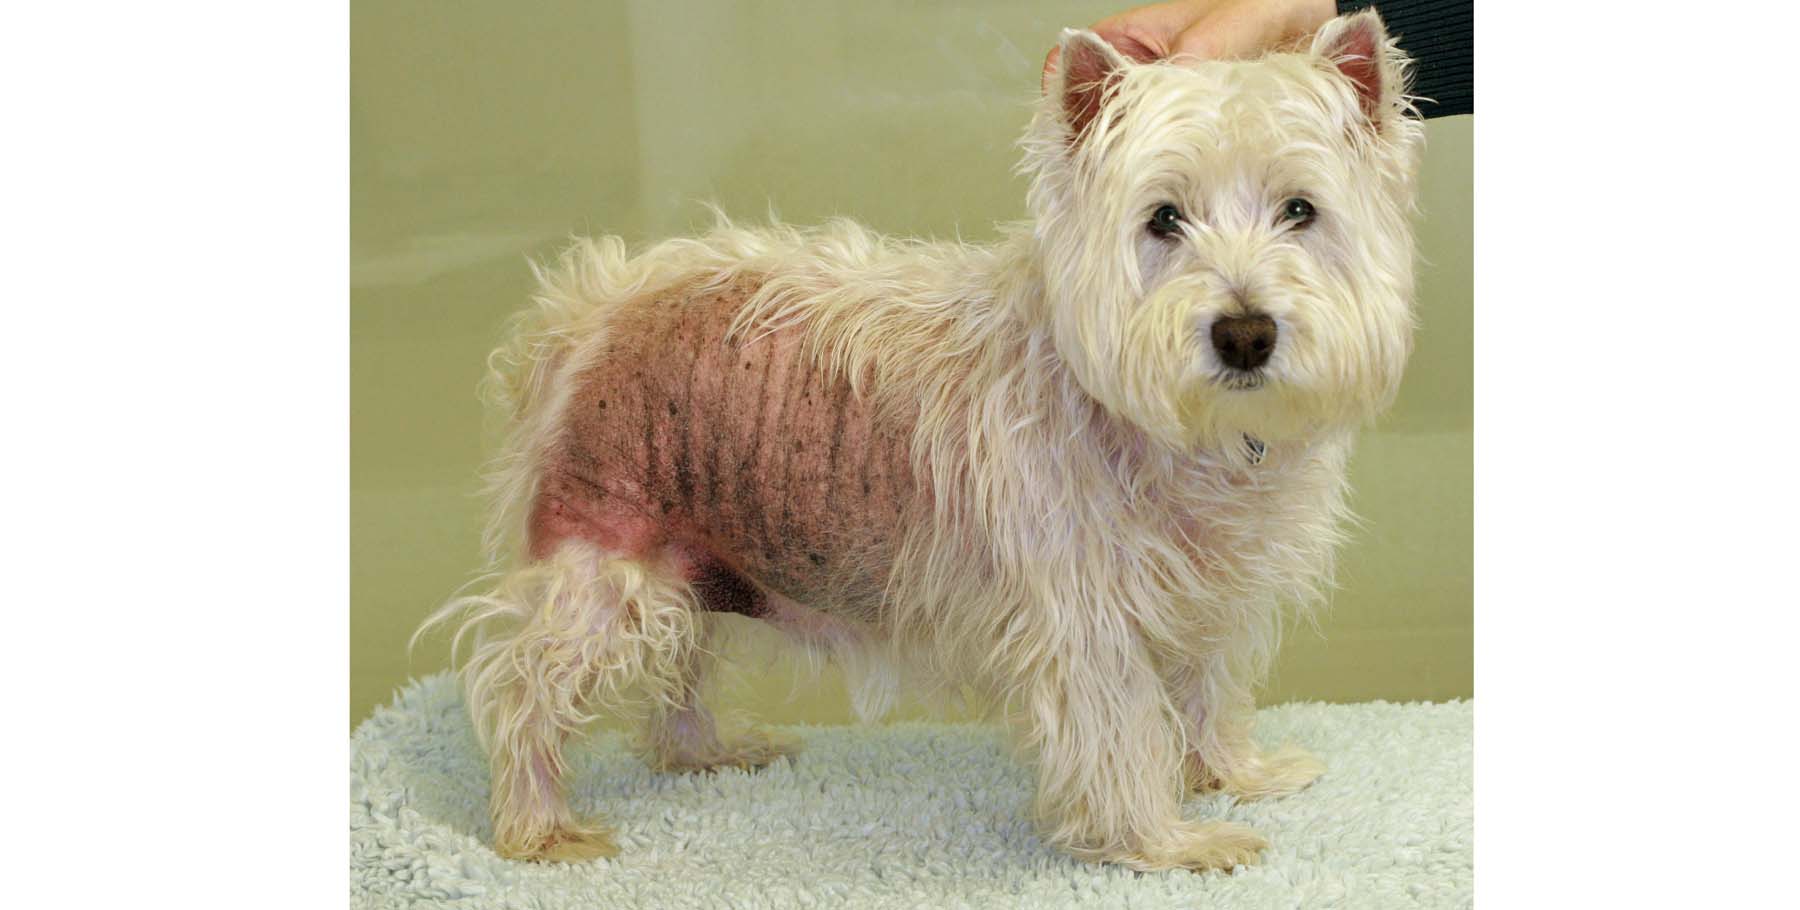 Chronic Atopic Dermatitis: Steroid-induced Alopecia, West Highland White Terrier